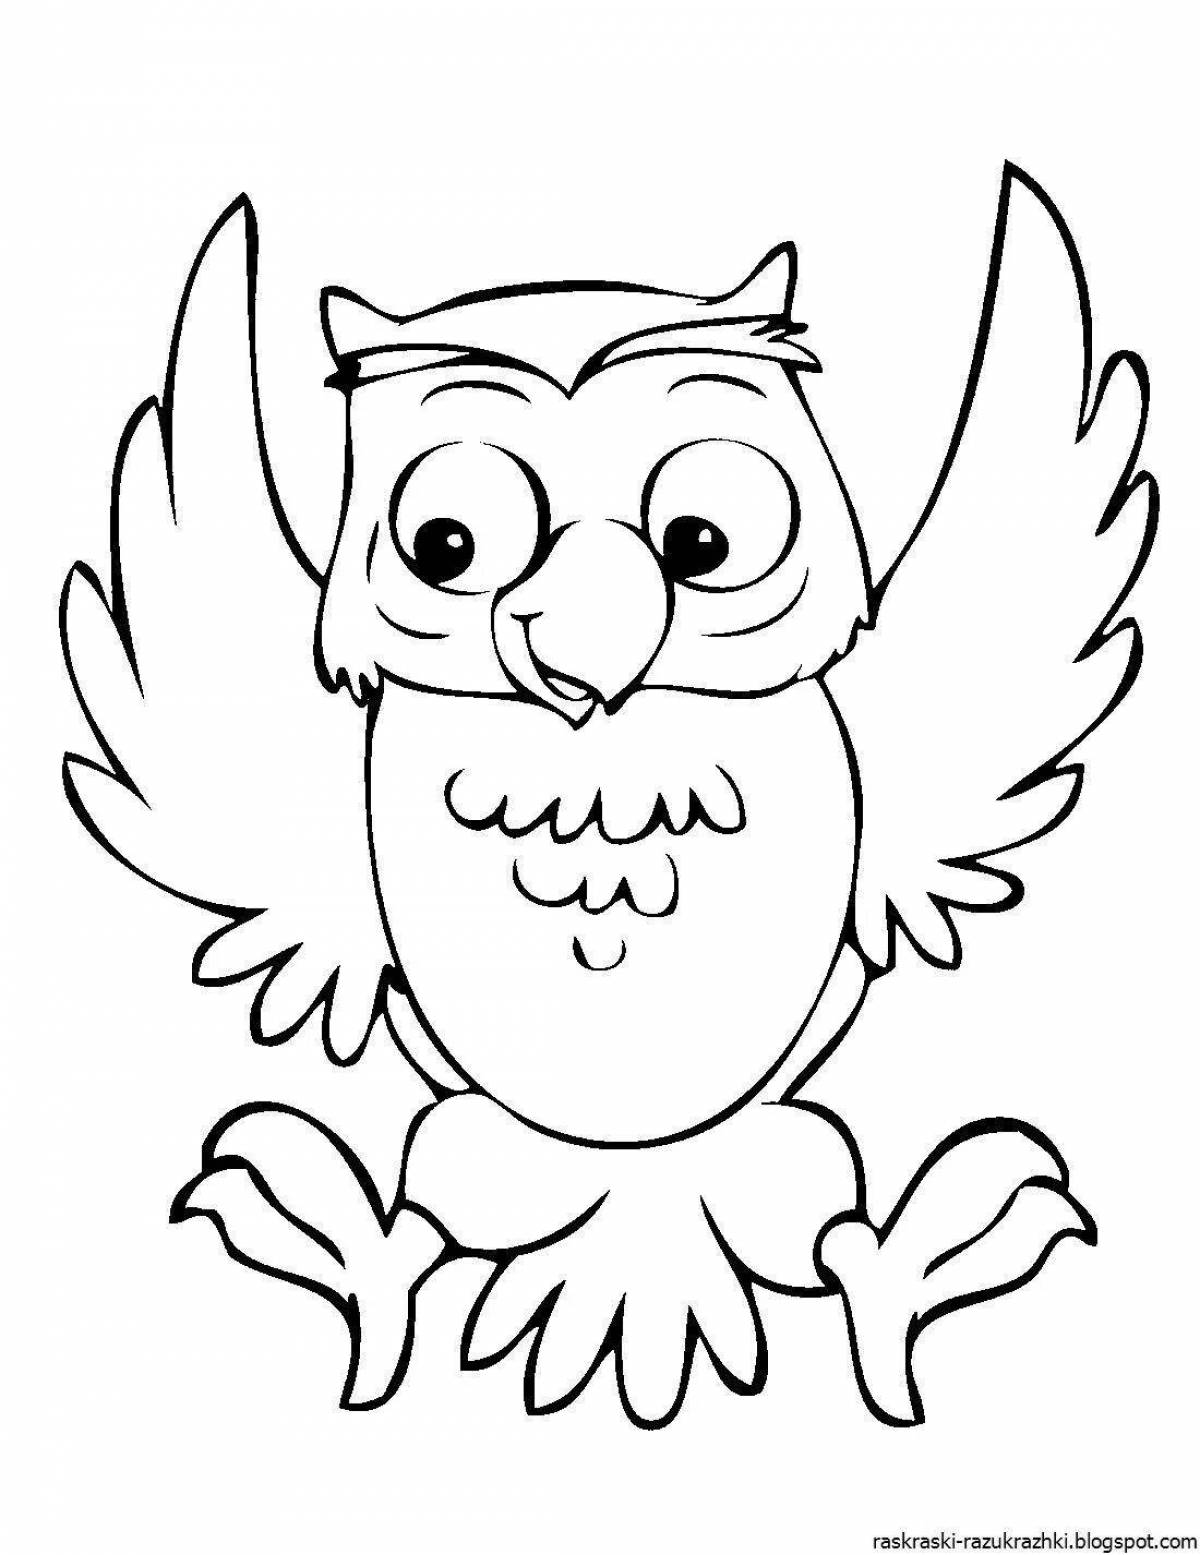 Colouring bright owl for kids